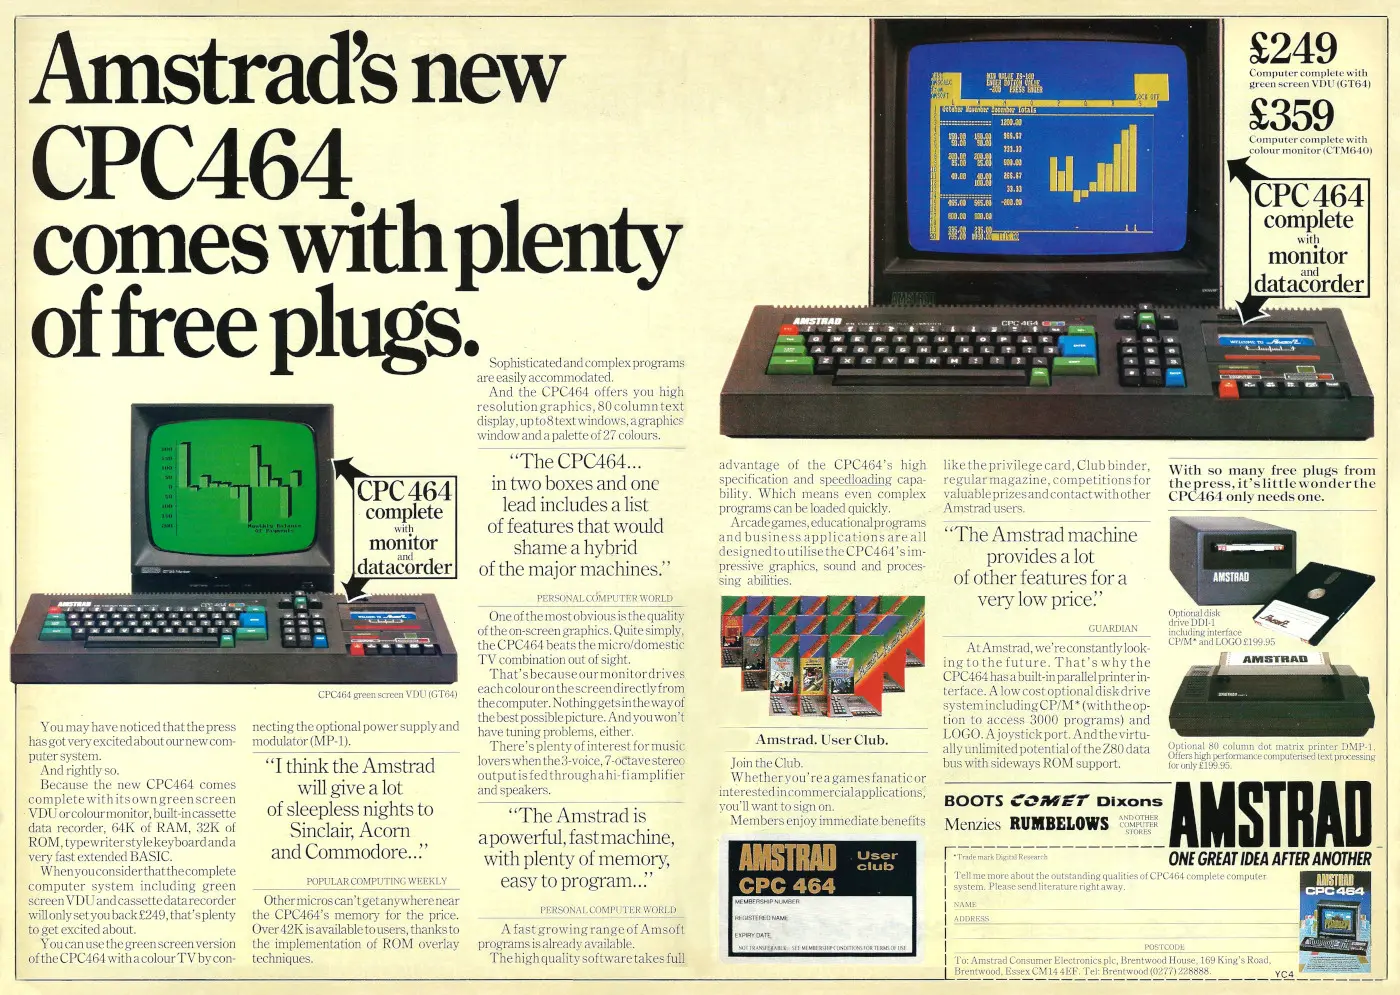 Amstrad Advert: Amstrad's new CPC 464 comes with plenty of free plugs, from Your Computer, December 1984